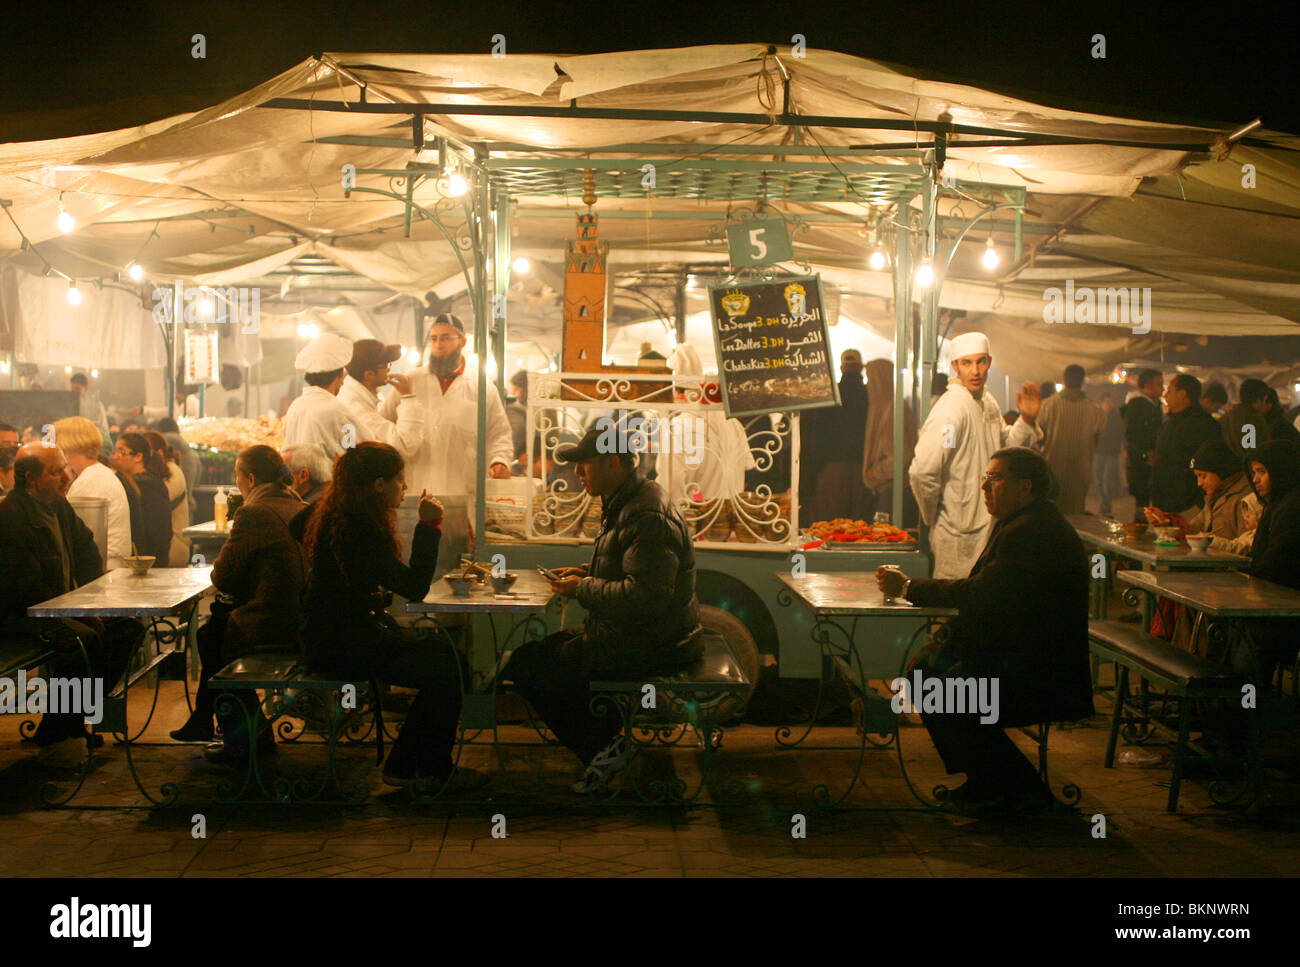 Evening diners pictured at a food stall in the Djemaa el-fna square in Marrakesh, Morocco. Stock Photo